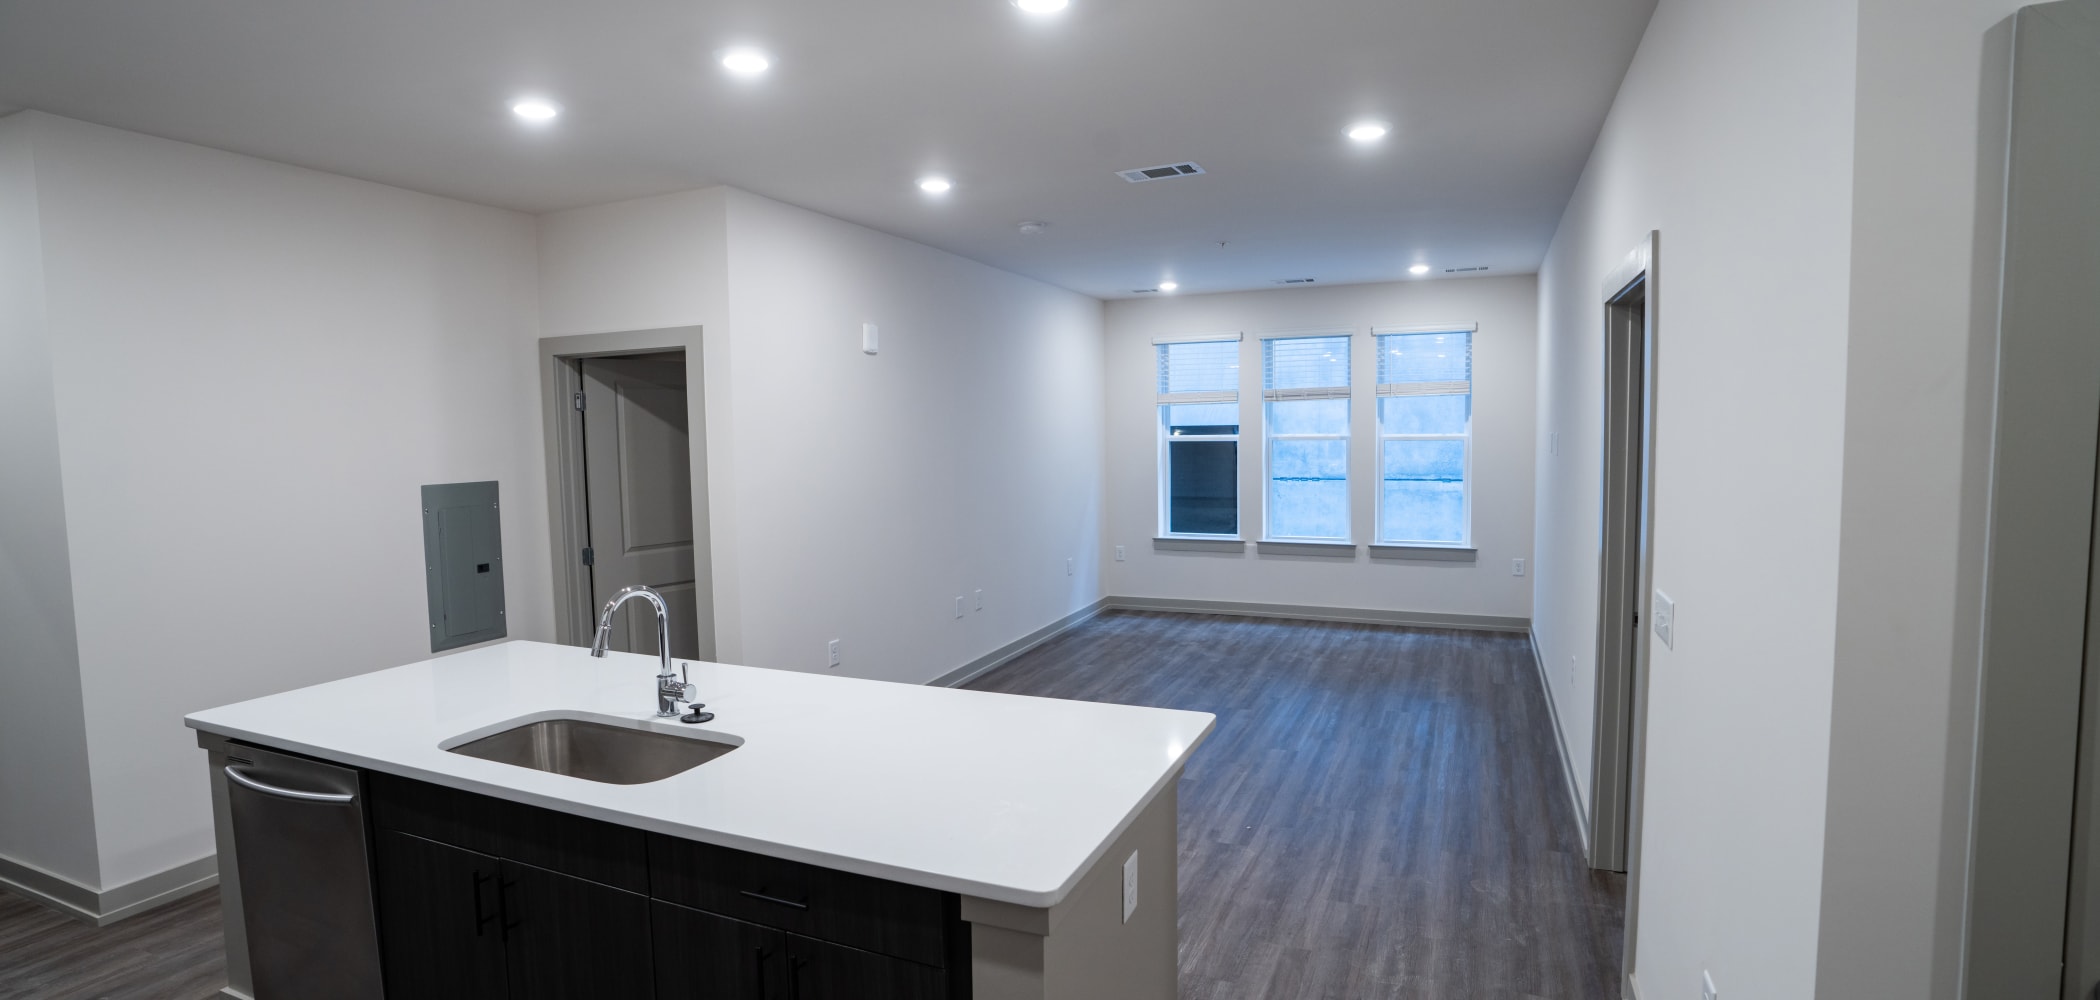 Living Room & Kitchen Island at The Jolly Roger |Student Apartments in Greenville, North Carolina